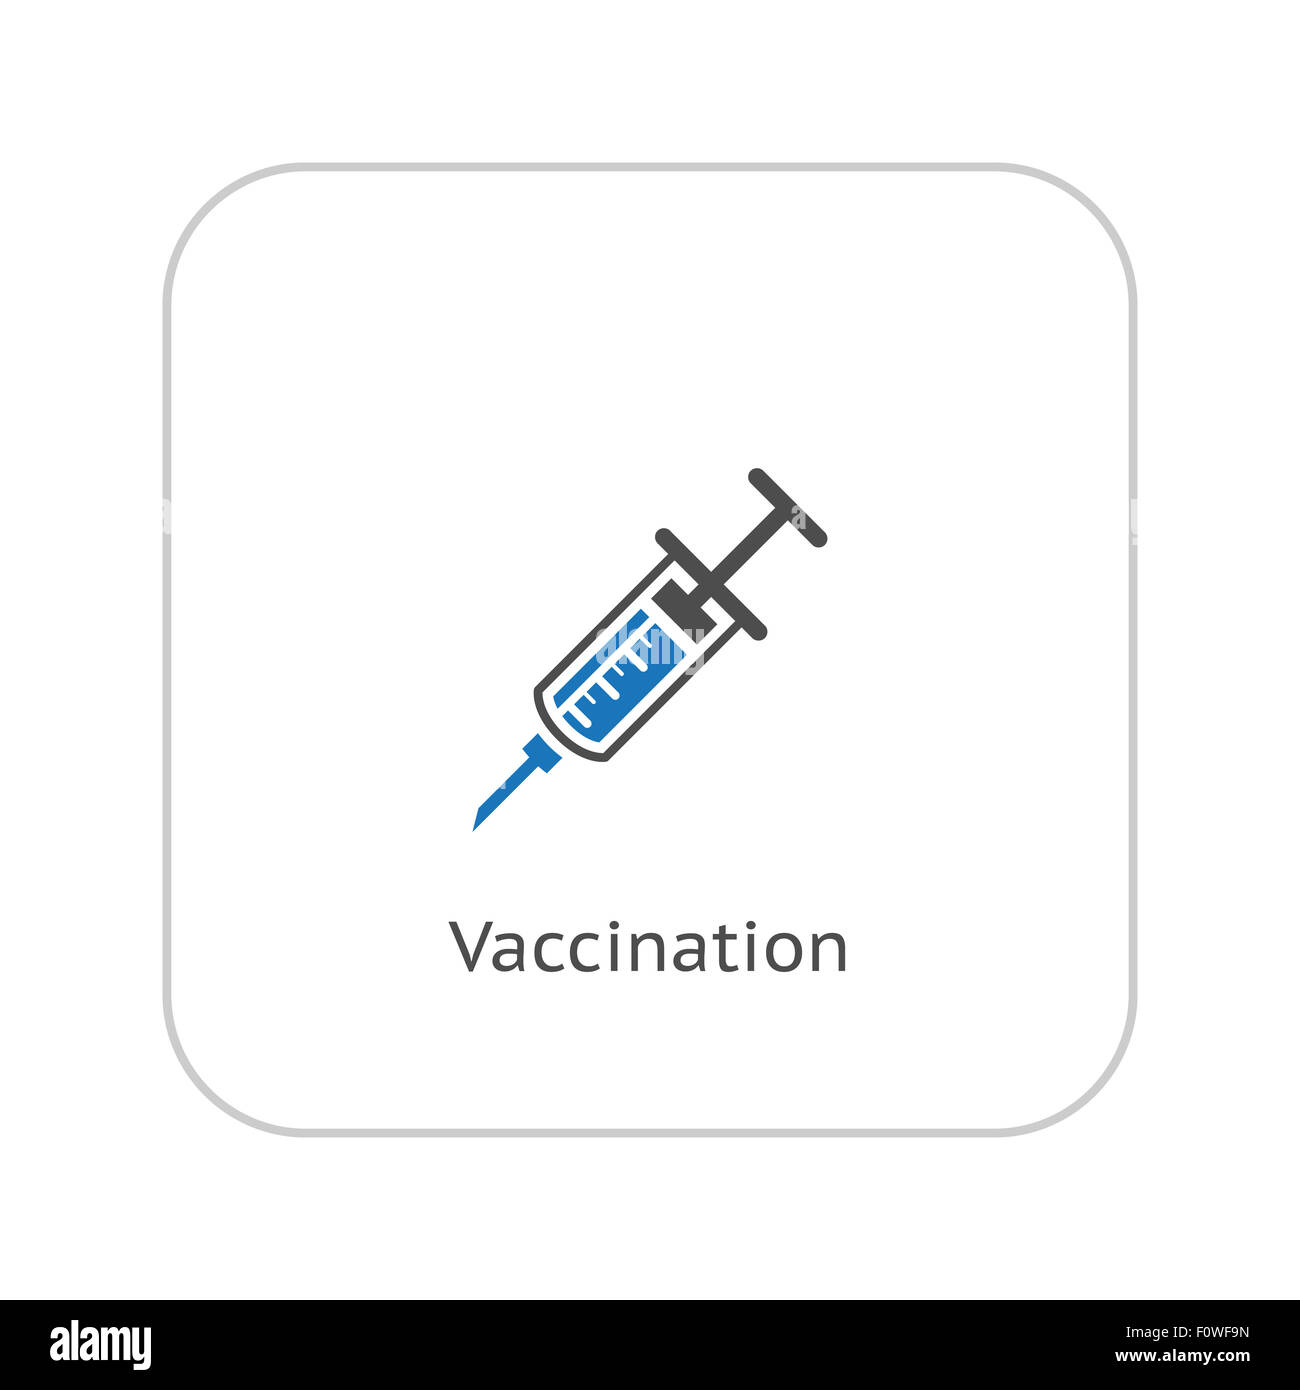 Vaccination and Medical Services Icon. Flat Design. Isolated. Stock Photo